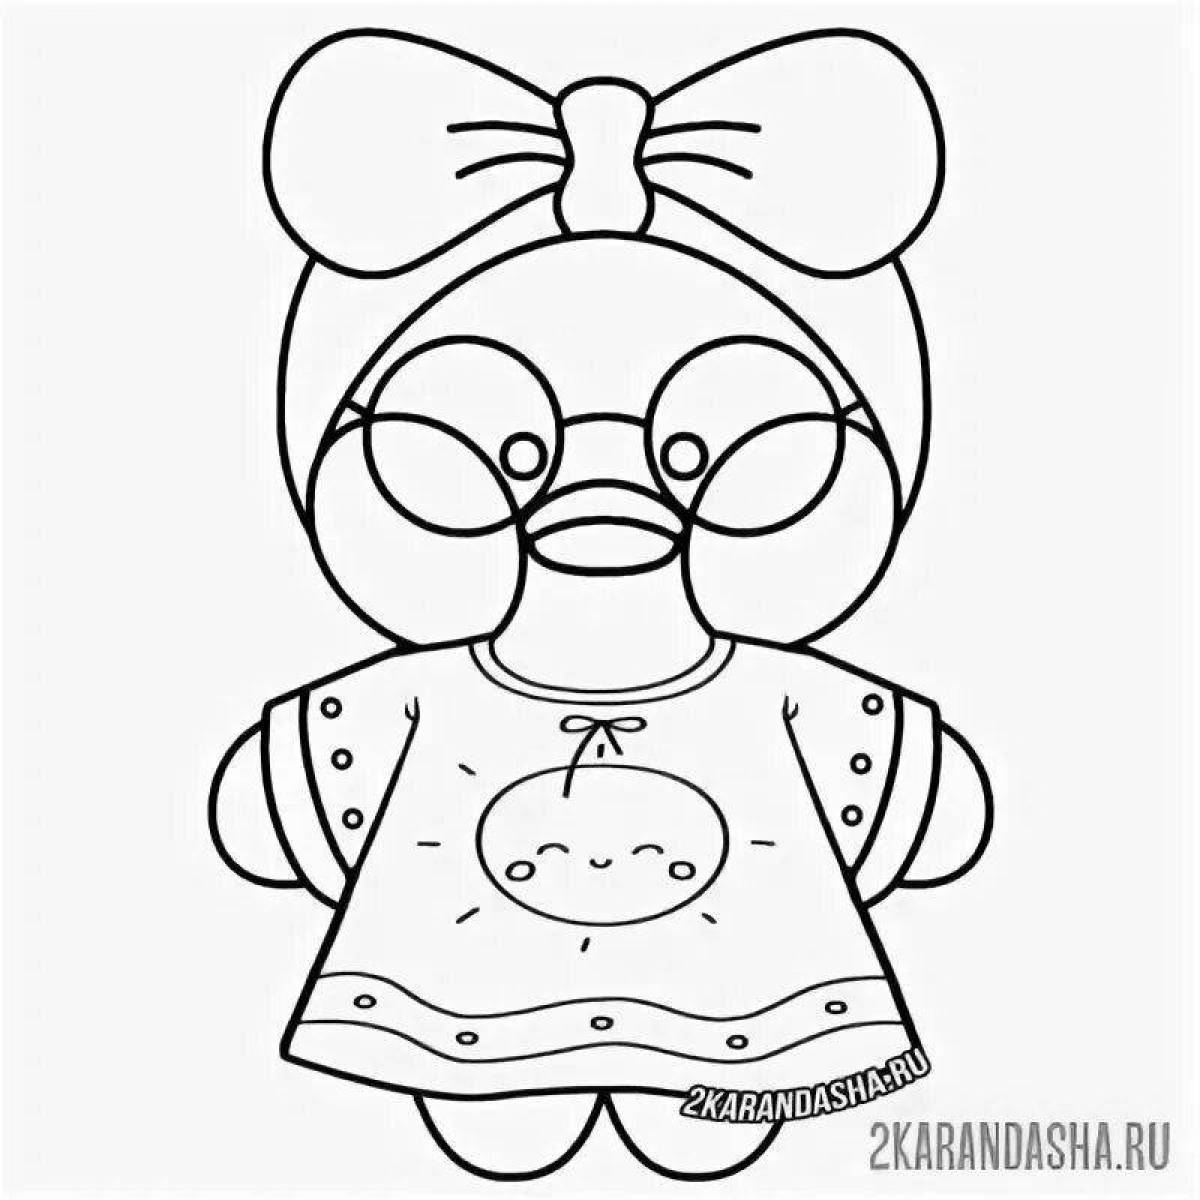 Impressive lalafanfan duck coloring book with clothes